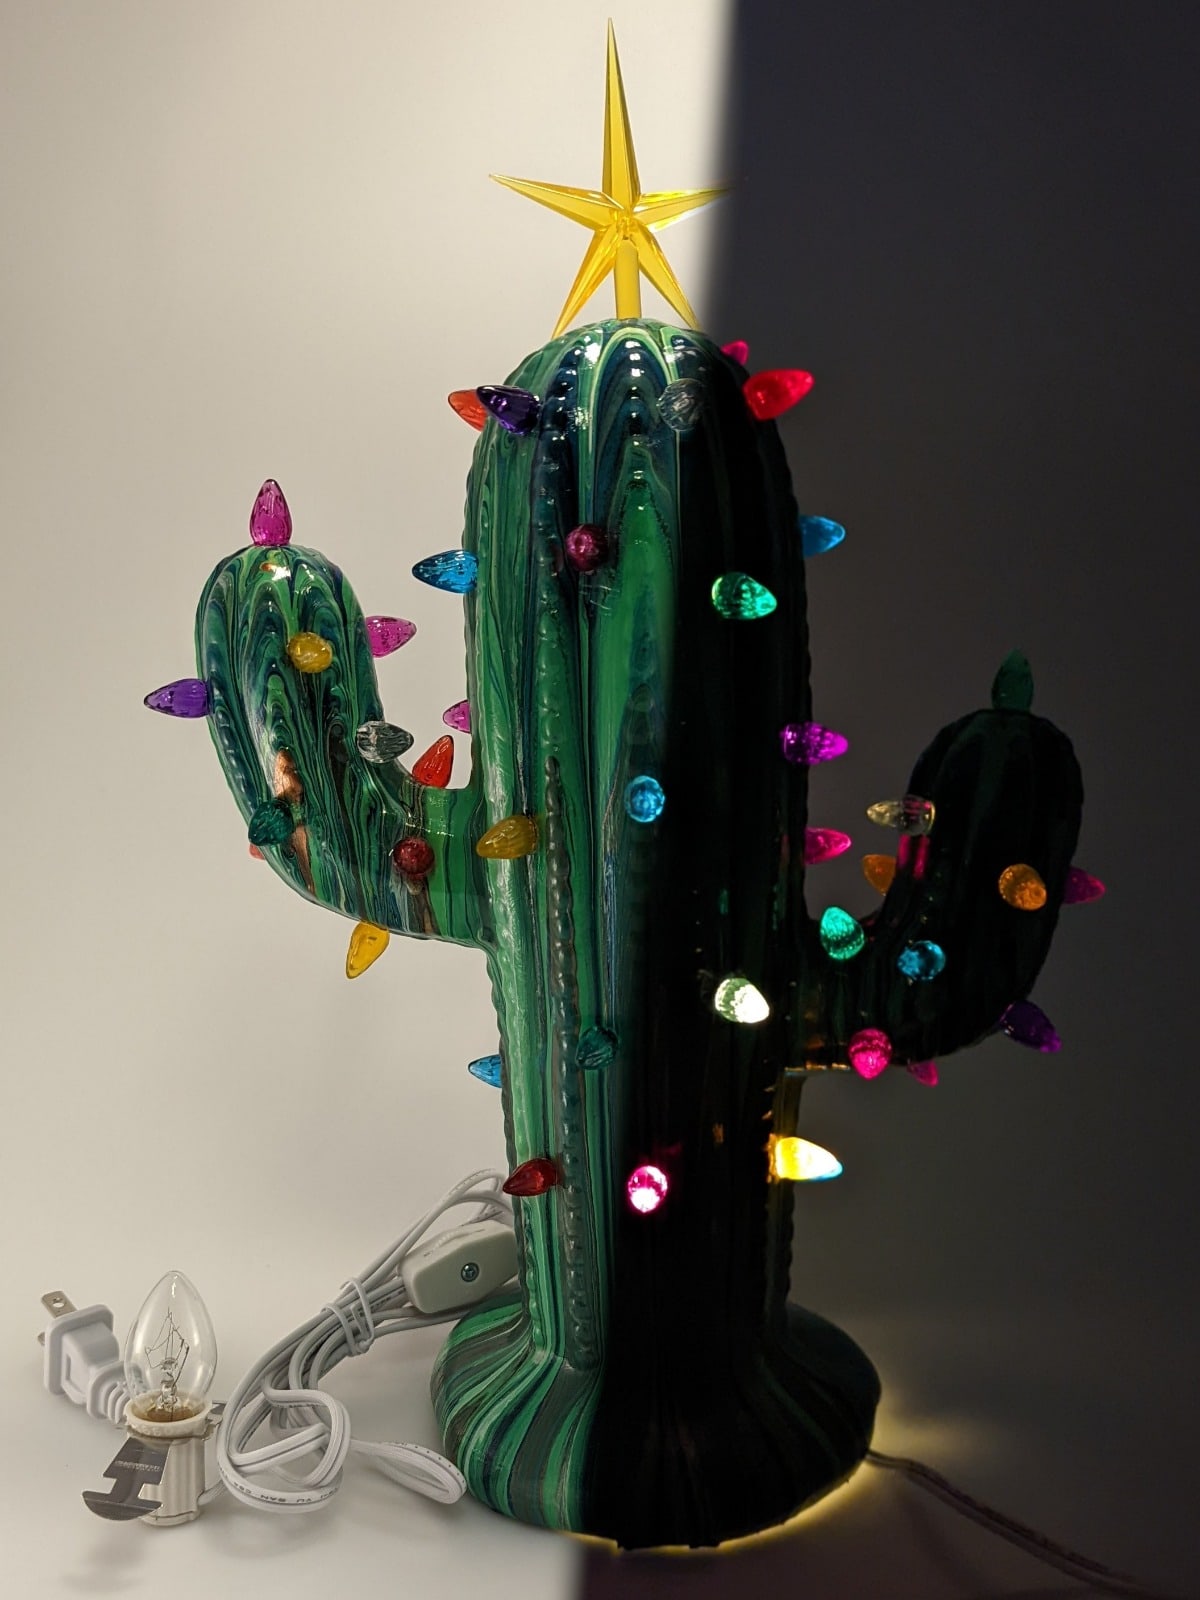 Lighted Ceramic Cacti are now available!